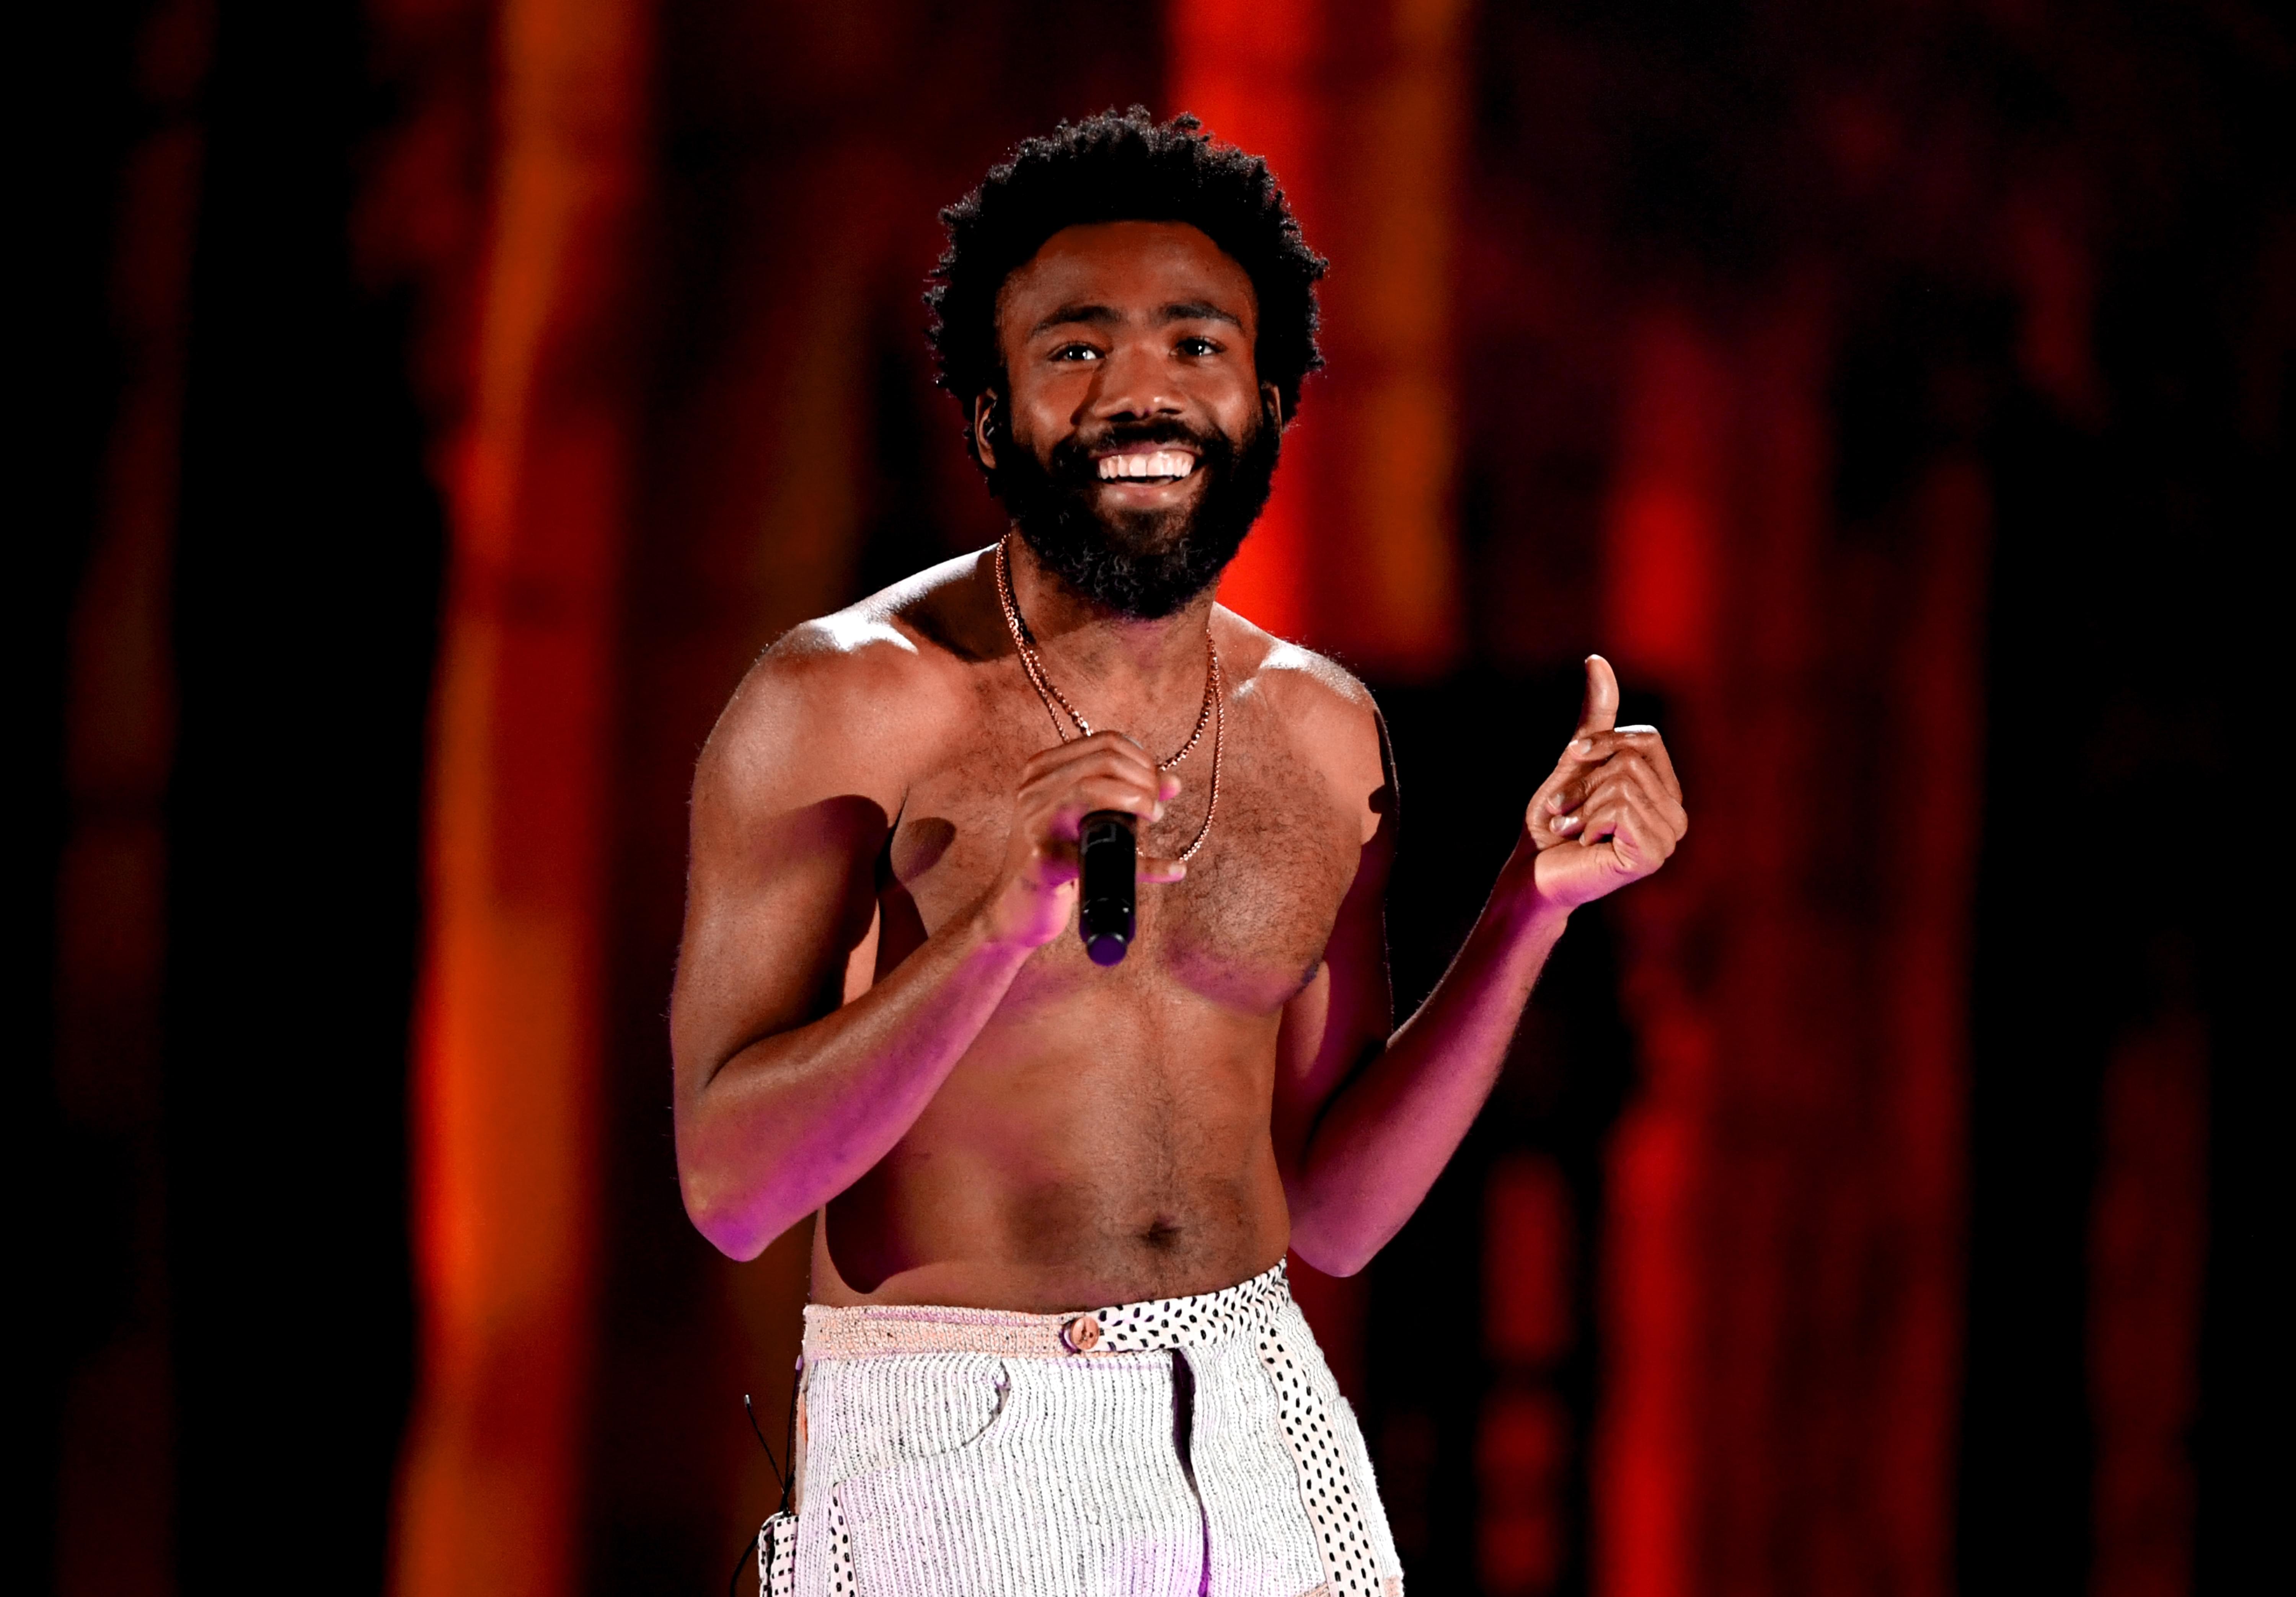 Donald Glover’s “Guava Island” Starring Rihanna Gets Leaked!